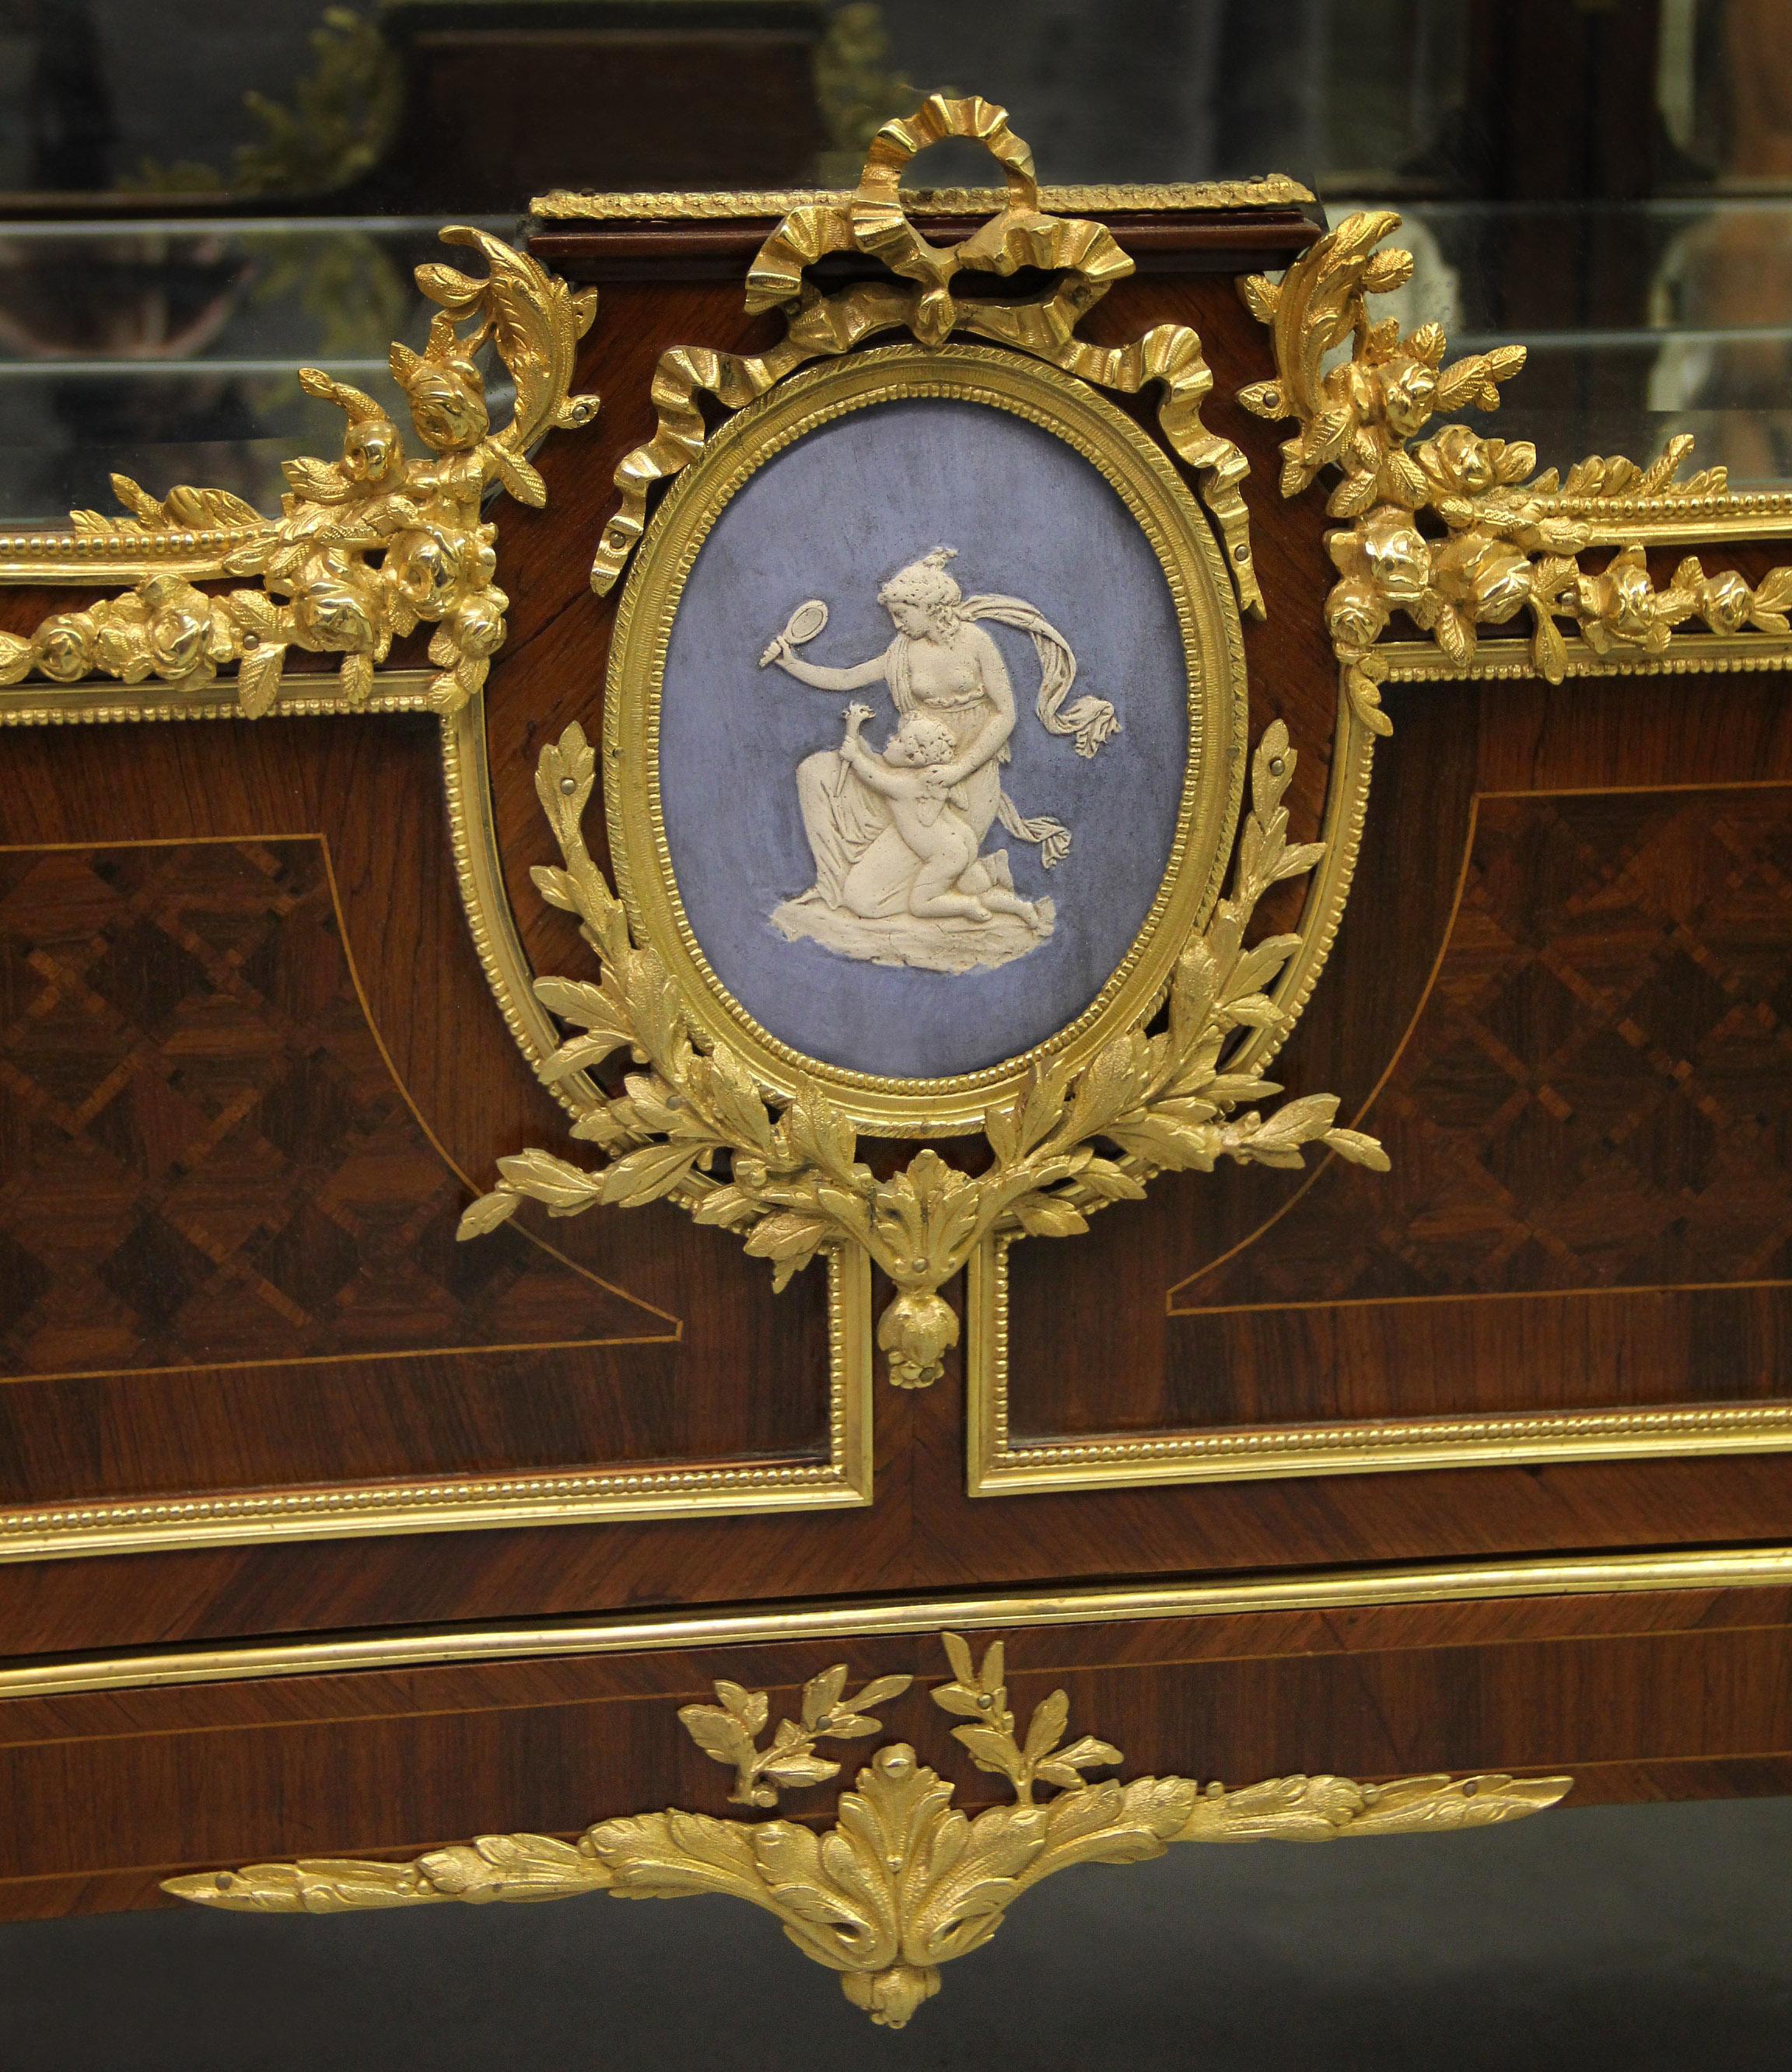 An interesting late 19th century Louis XVI style gilt bronze and wedgwood Mounted parquetry vitrine

The breakfront marble top above a scrolled frieze cast with motif depicting a pair of rams centered by cornucopia and a maiden, over a single